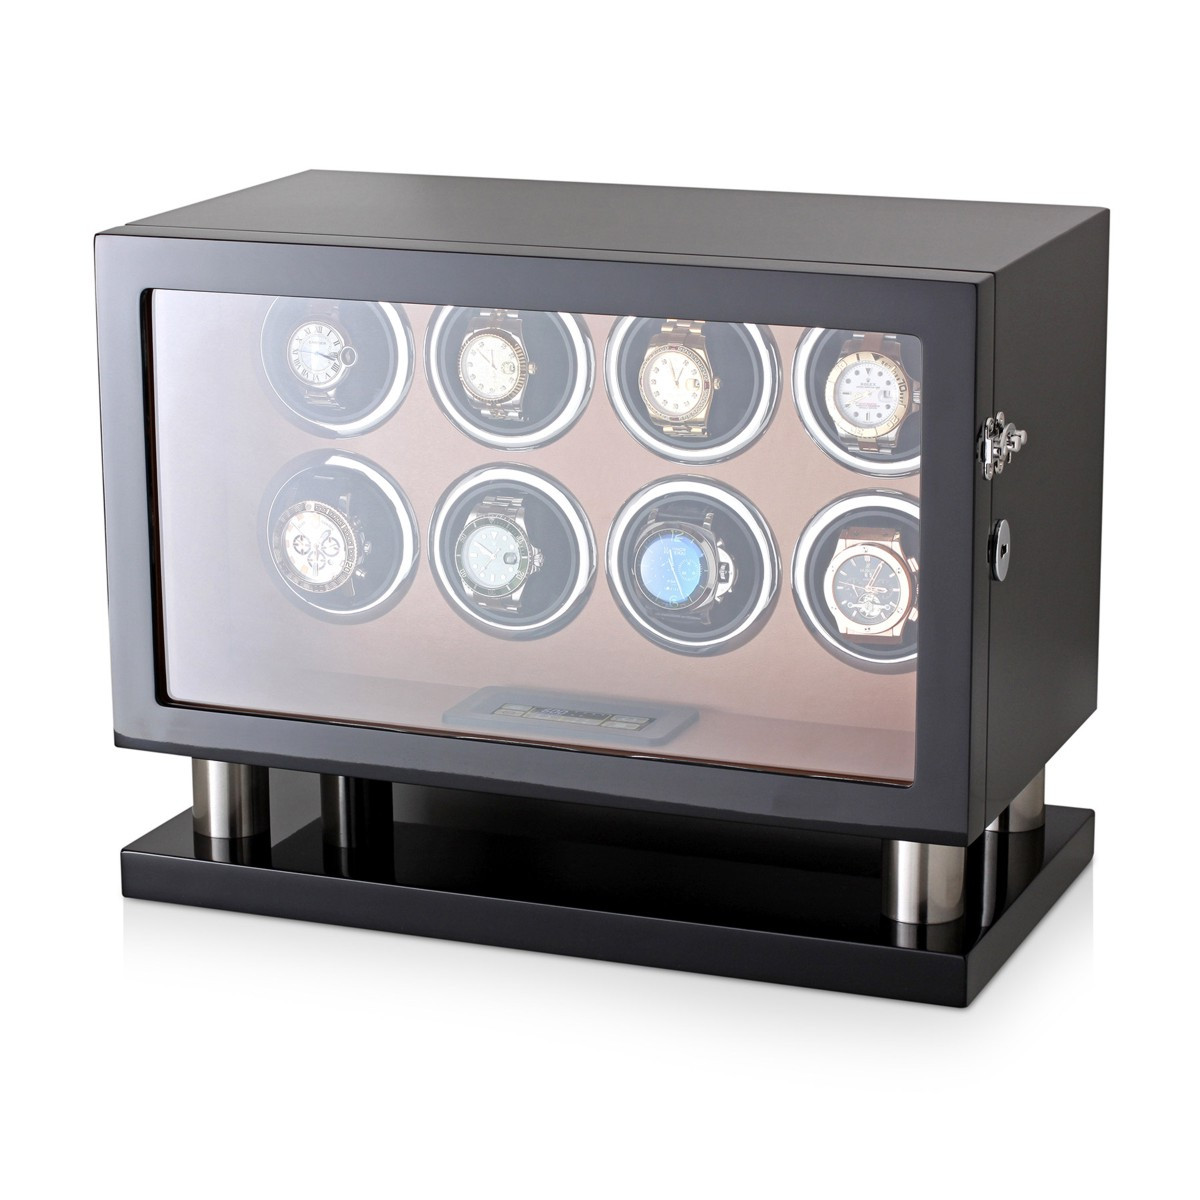 Watch Winder Box 8008-BBr-D for 8 Automatic Watches with Leather Lining